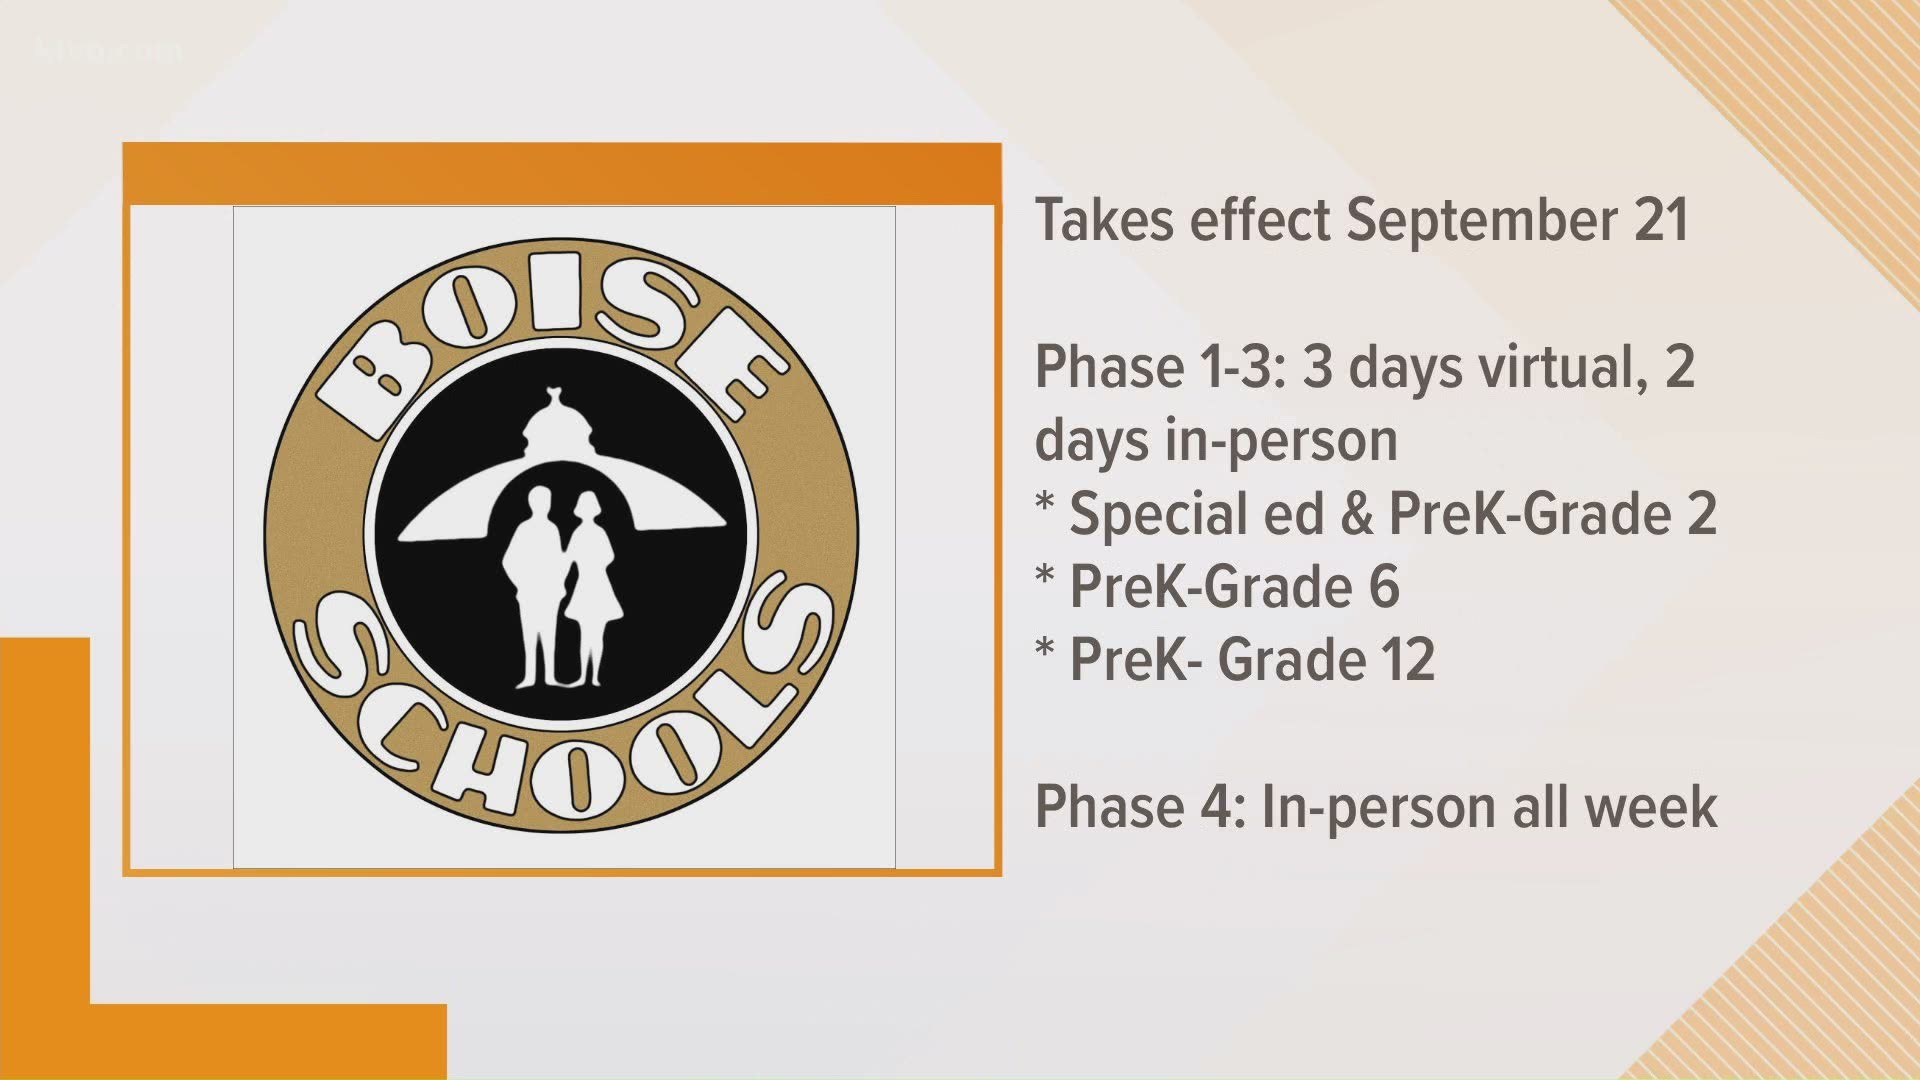 Here's what we know about Treasure Valley schools' plans to bring kids back to the classroom.